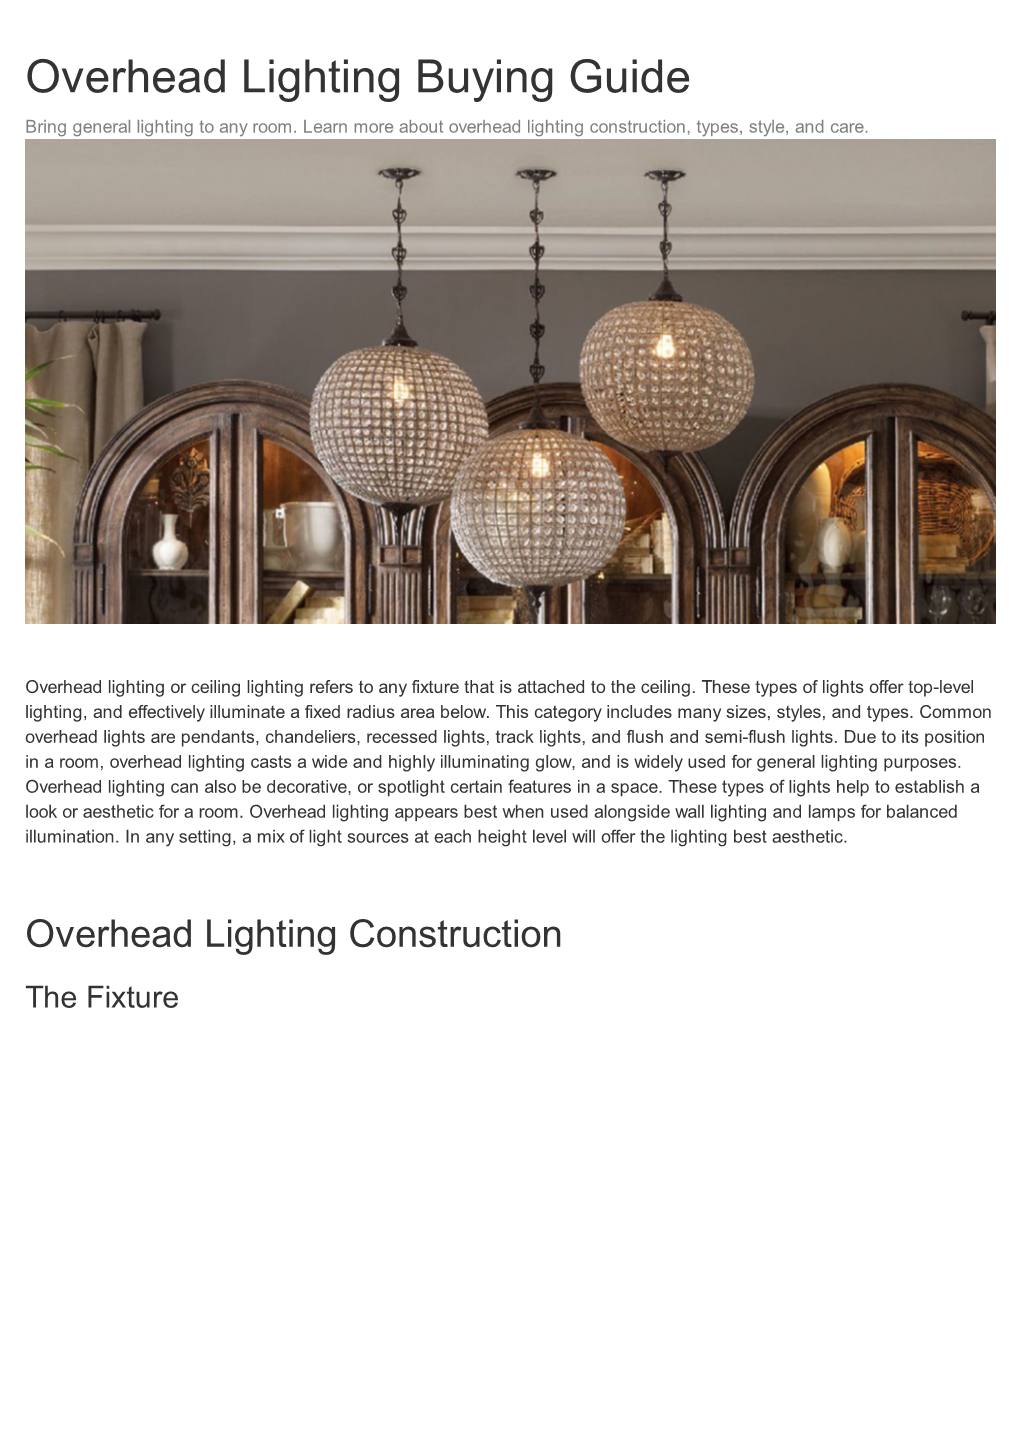 Overhead Lighting Buying Guide Bring General Lighting to Any Room